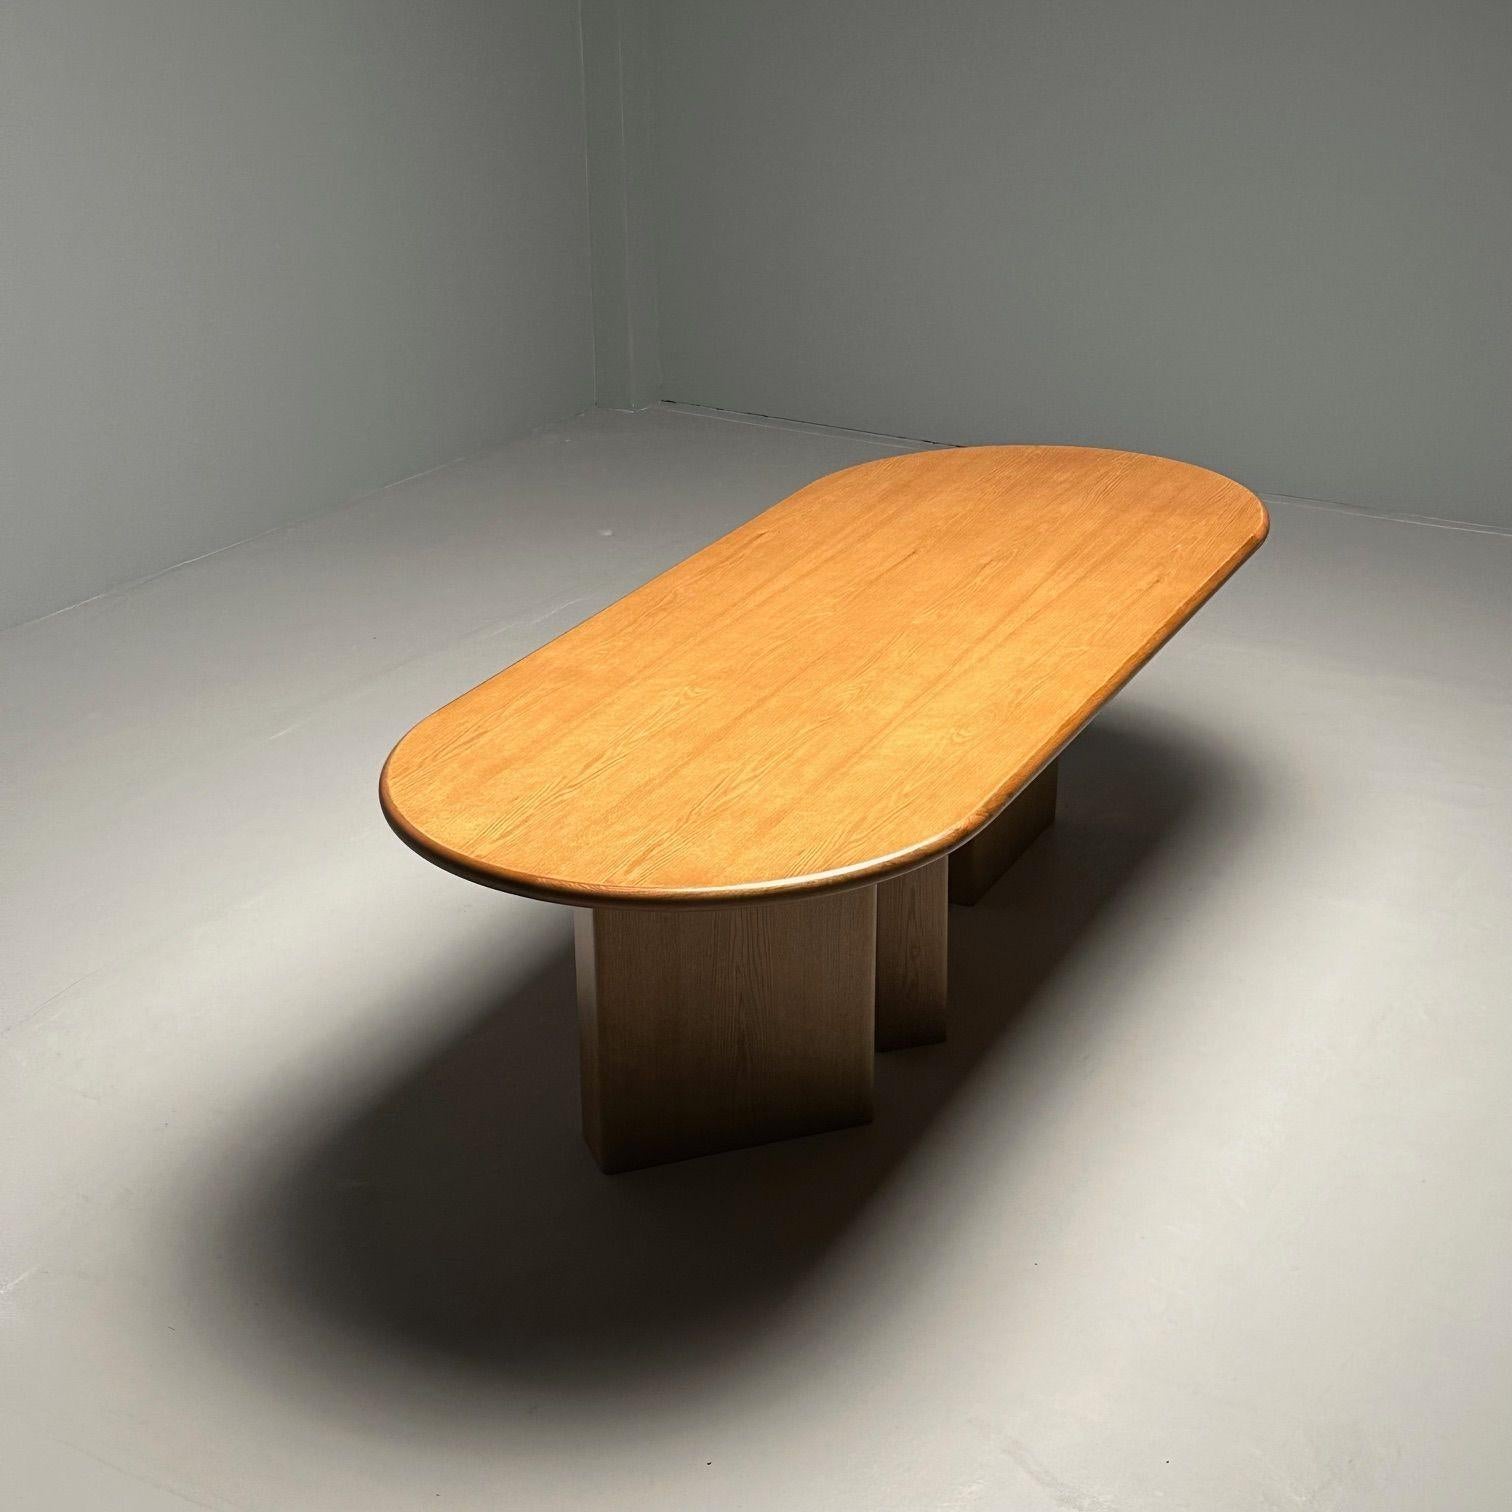 Contemporary Handcrafted Oval Dining Table, Solid Oak, Modern Pedestal Base For Sale 2